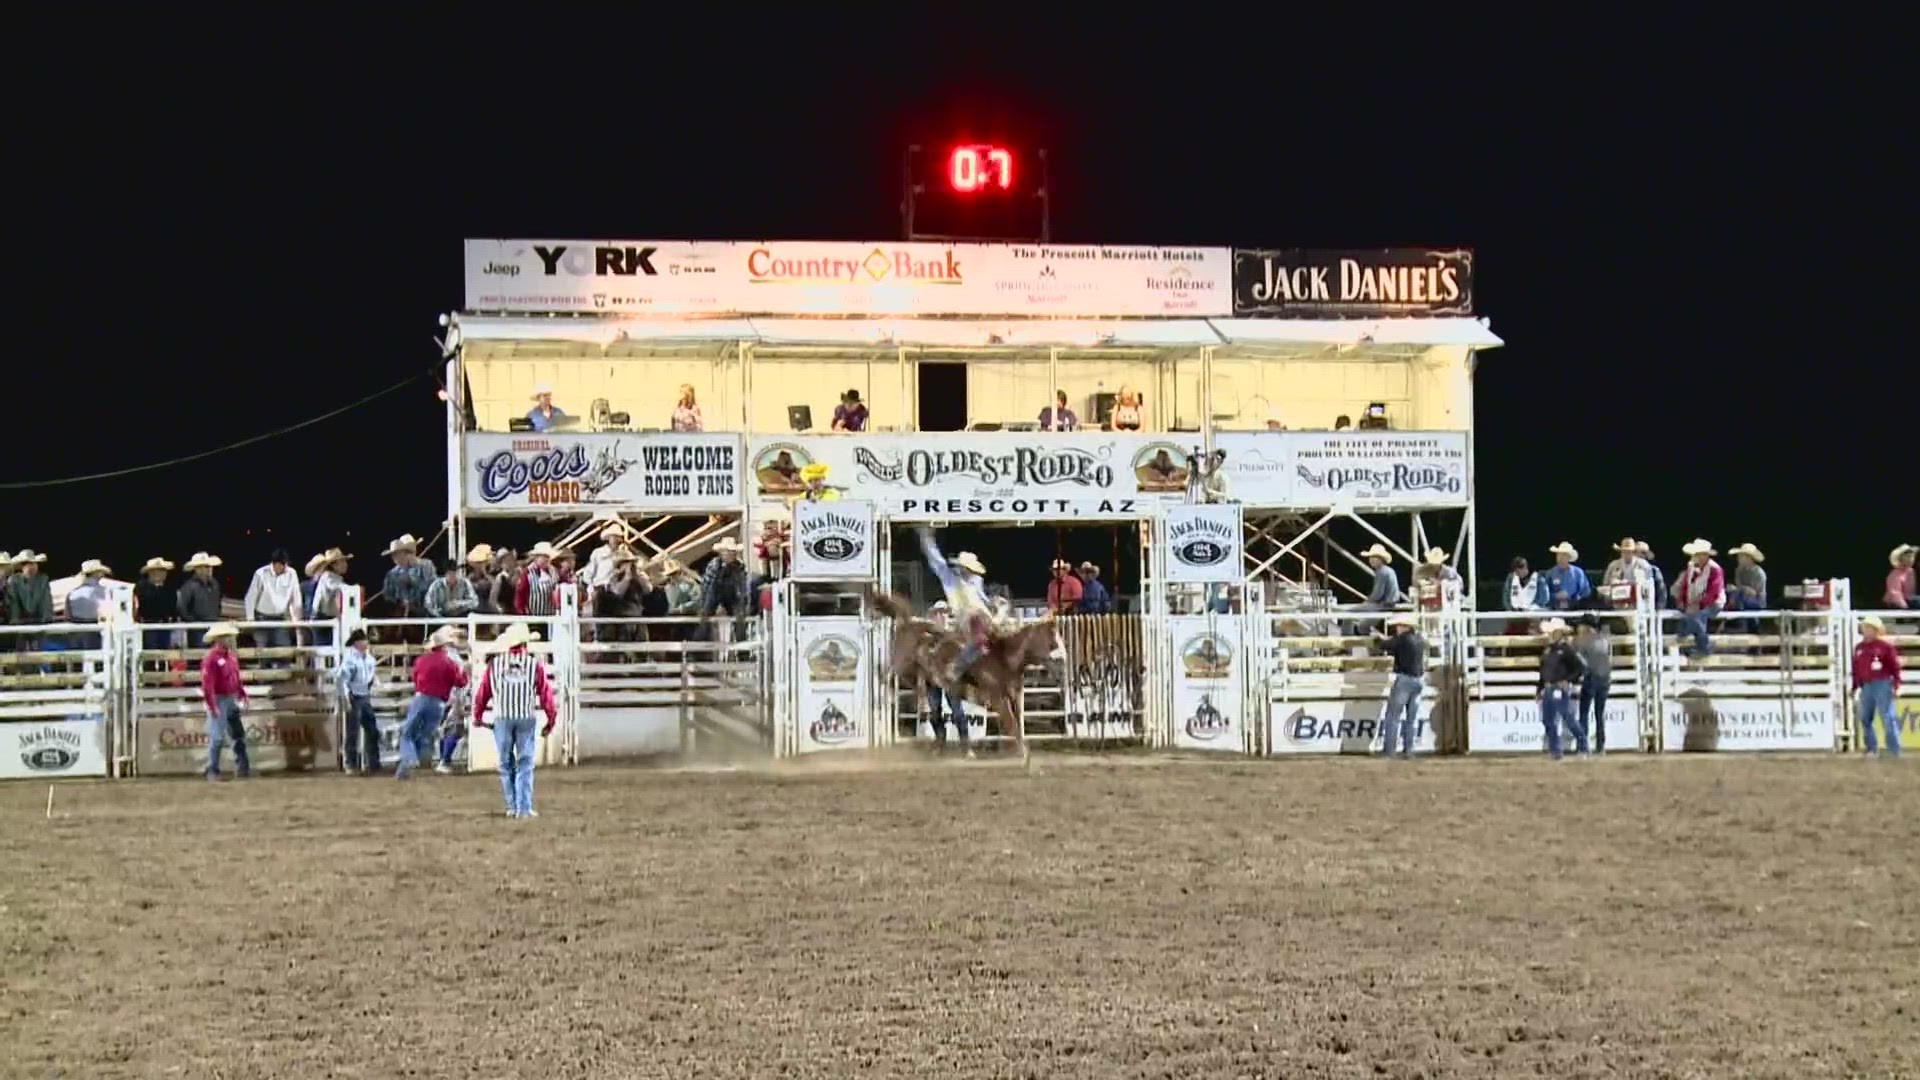 Two Prescott residents have filed a lawsuit that objects to the state appropriating $15 million to organizers of a local rodeo event.